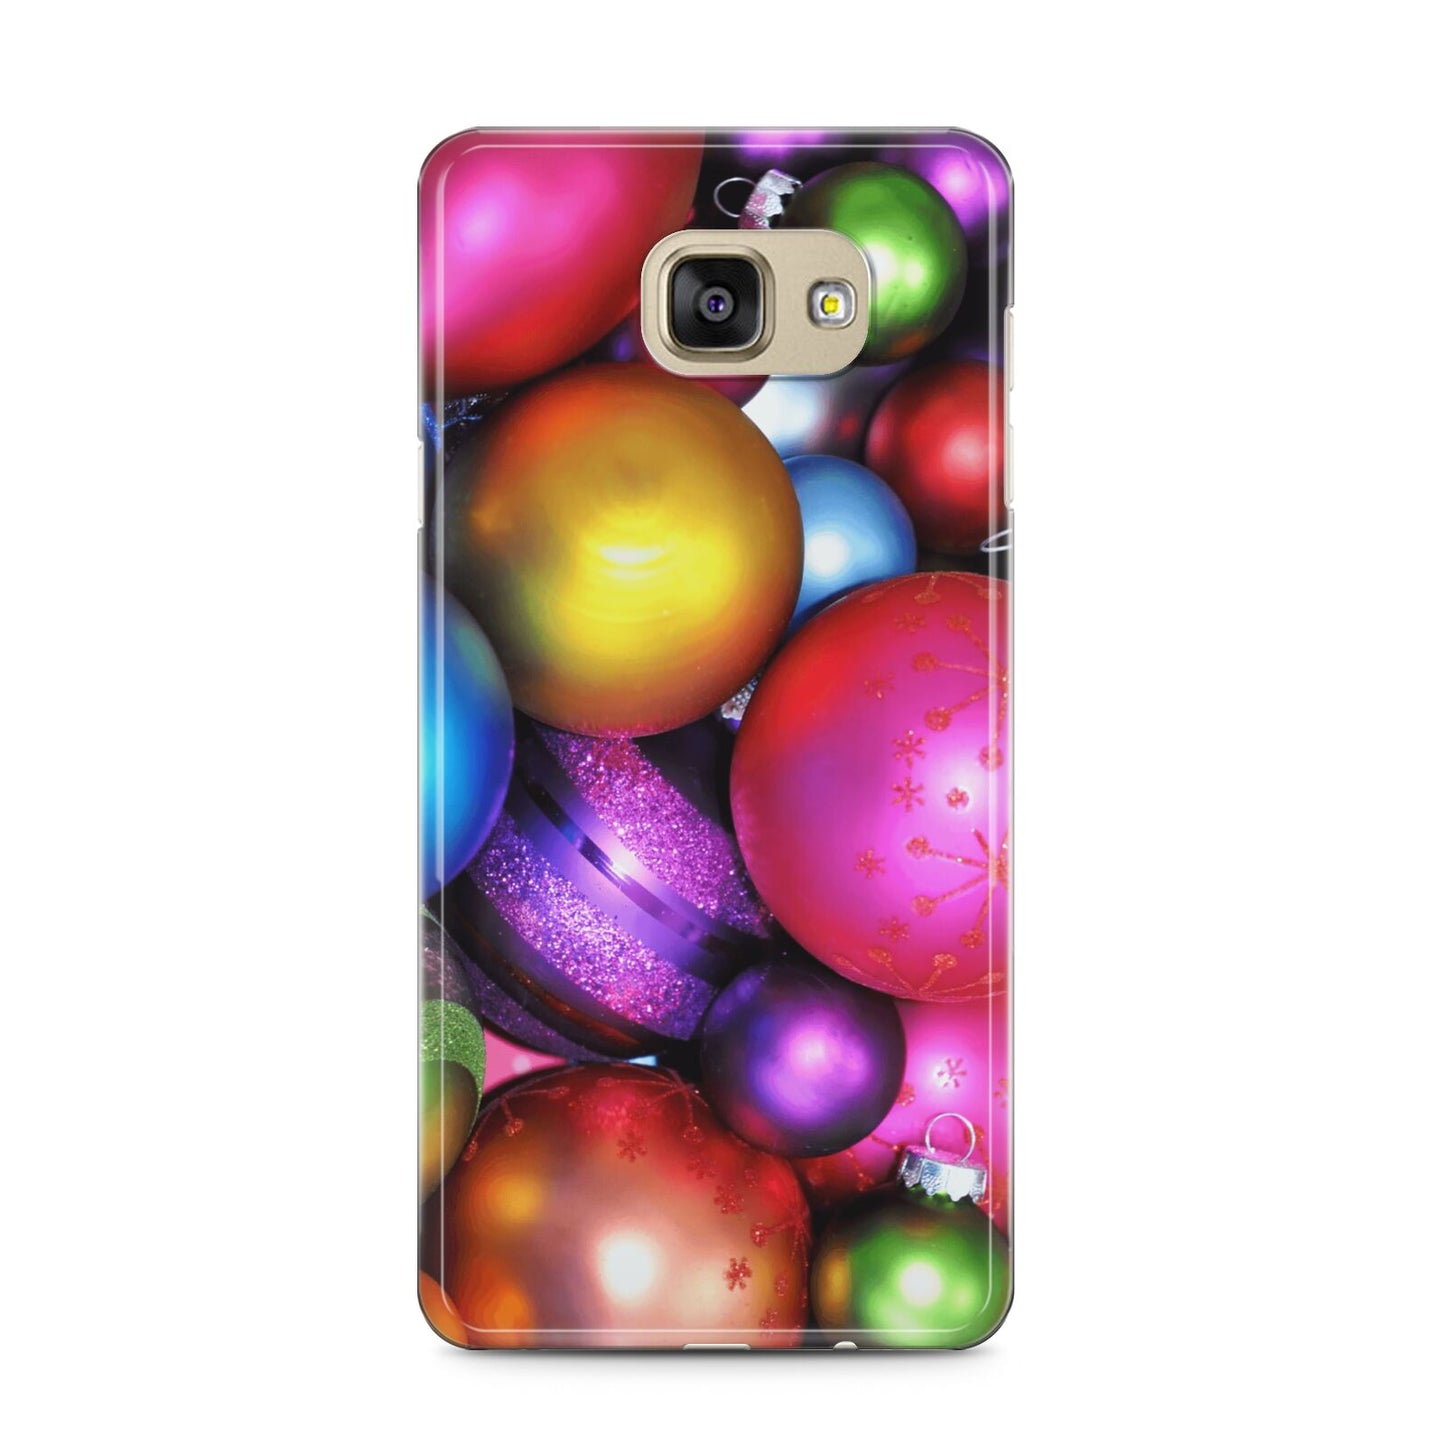 Bauble Samsung Galaxy A5 2016 Case on gold phone